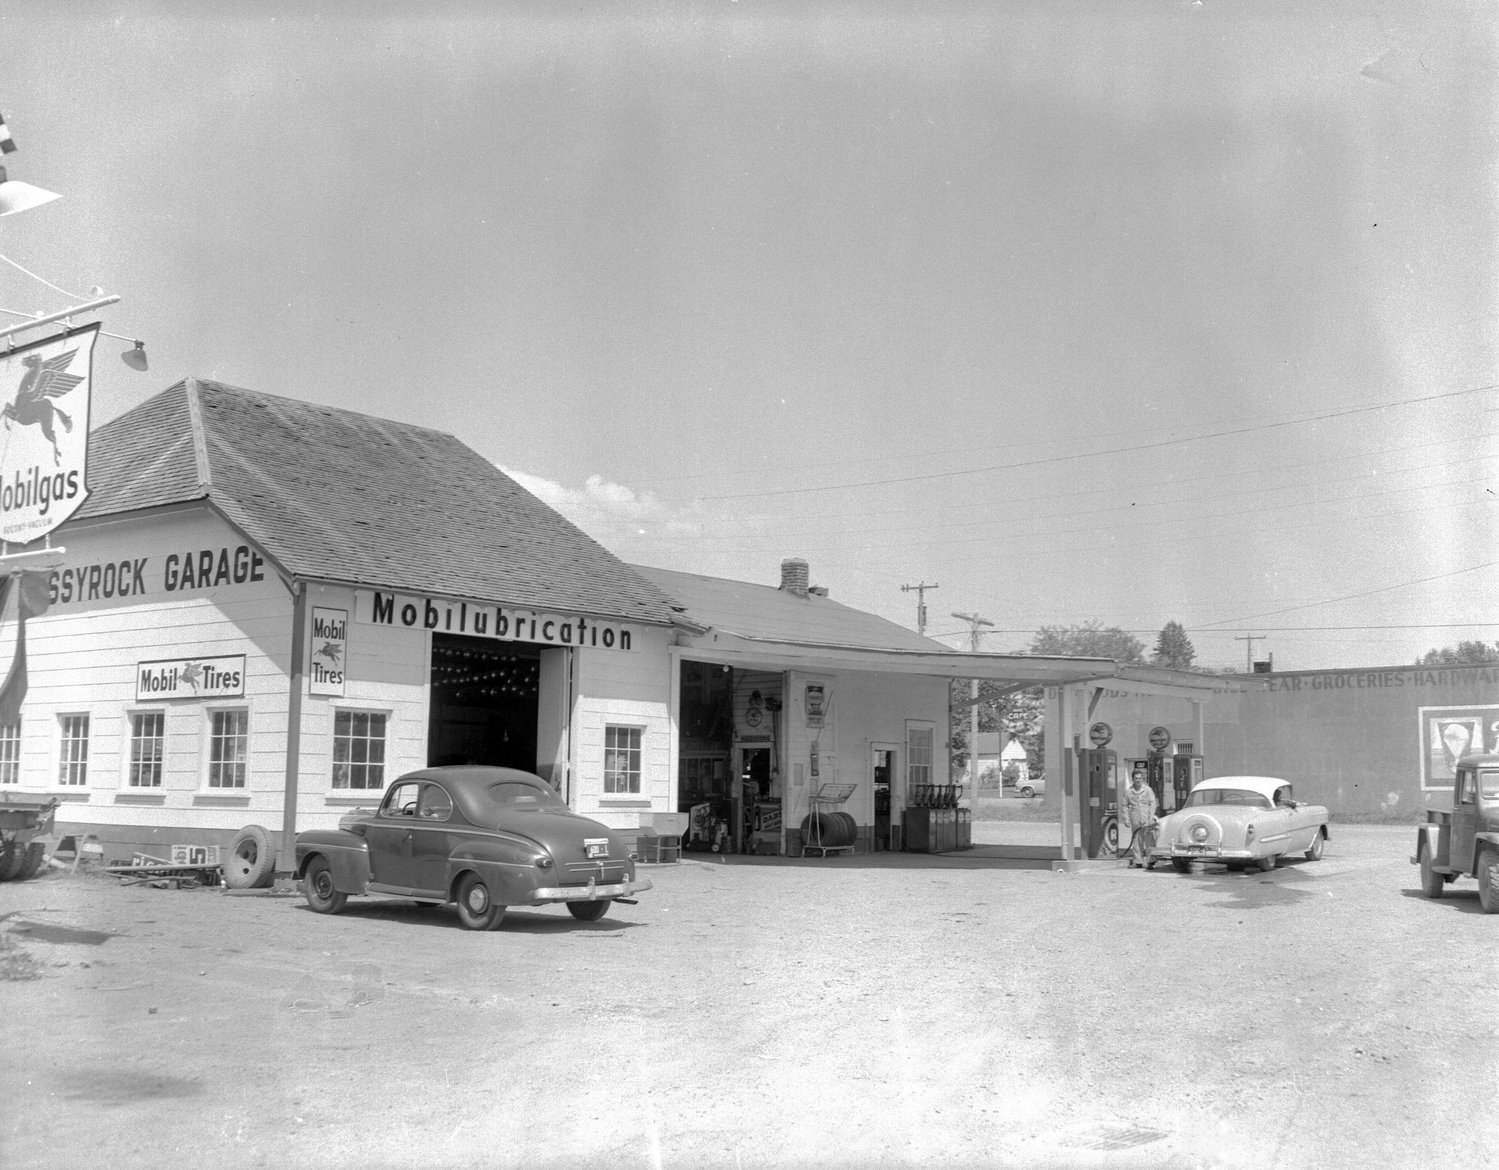 In 1956, a Chronicle newsroom staffer traveled to Mossyrock to collect dozens of photographs of area people and businesses. These photos were recently digitized from film in The Chronicle’s archives.